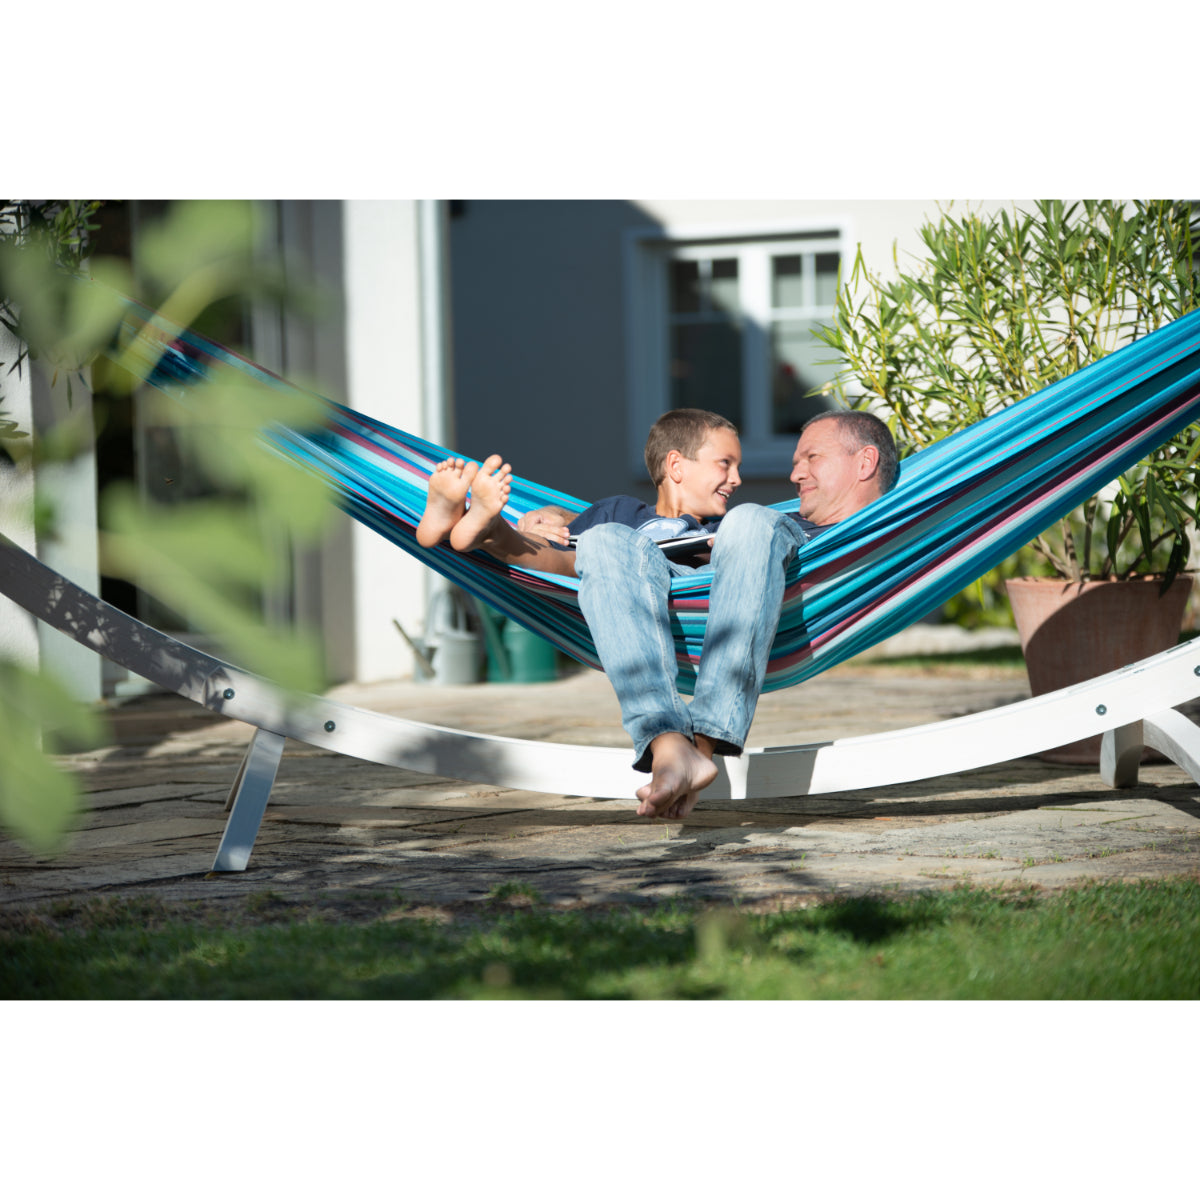 Father and Son Relaxing in Hammock